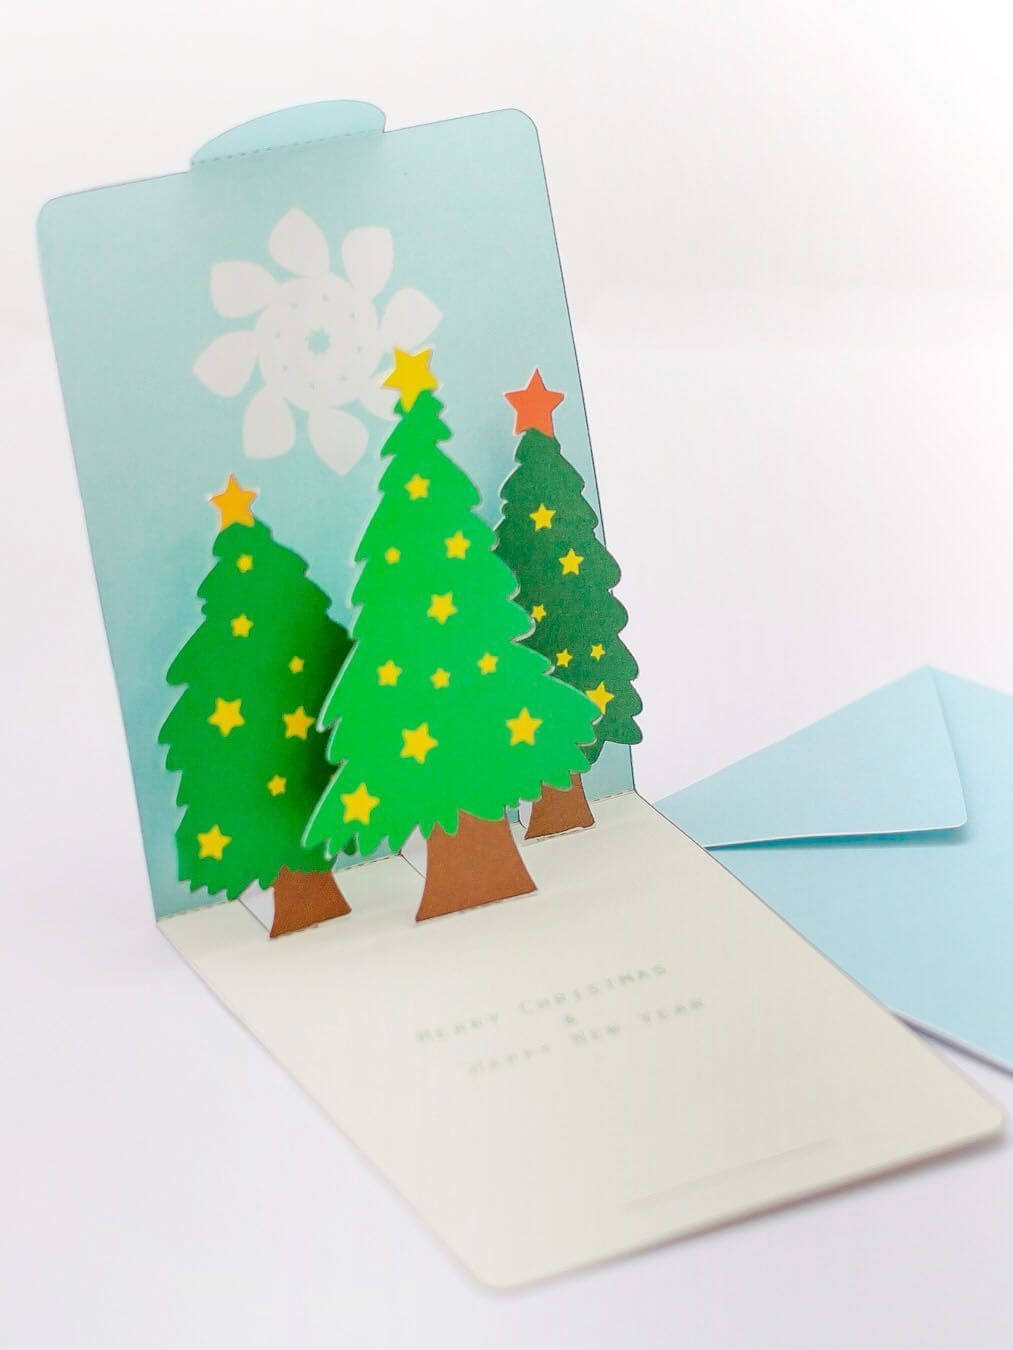 Tree Papercraft Free Pop Up Card Template Mookeep Origami Throughout Pop Up Tree Card Template